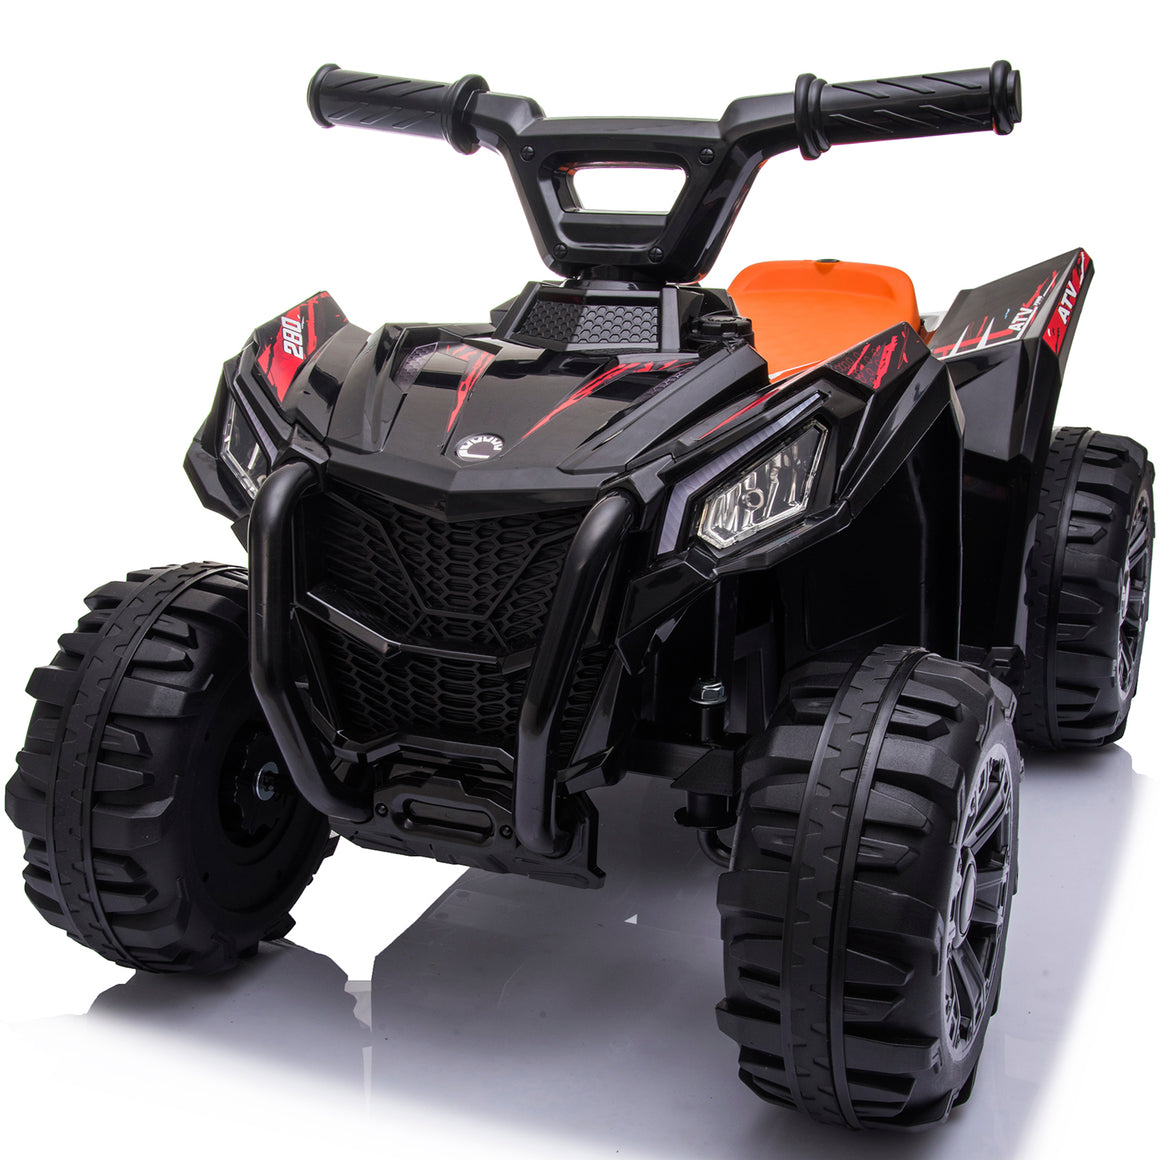 uhomepro 6V Black Electric Powered Ride On Quad for Boys Girls